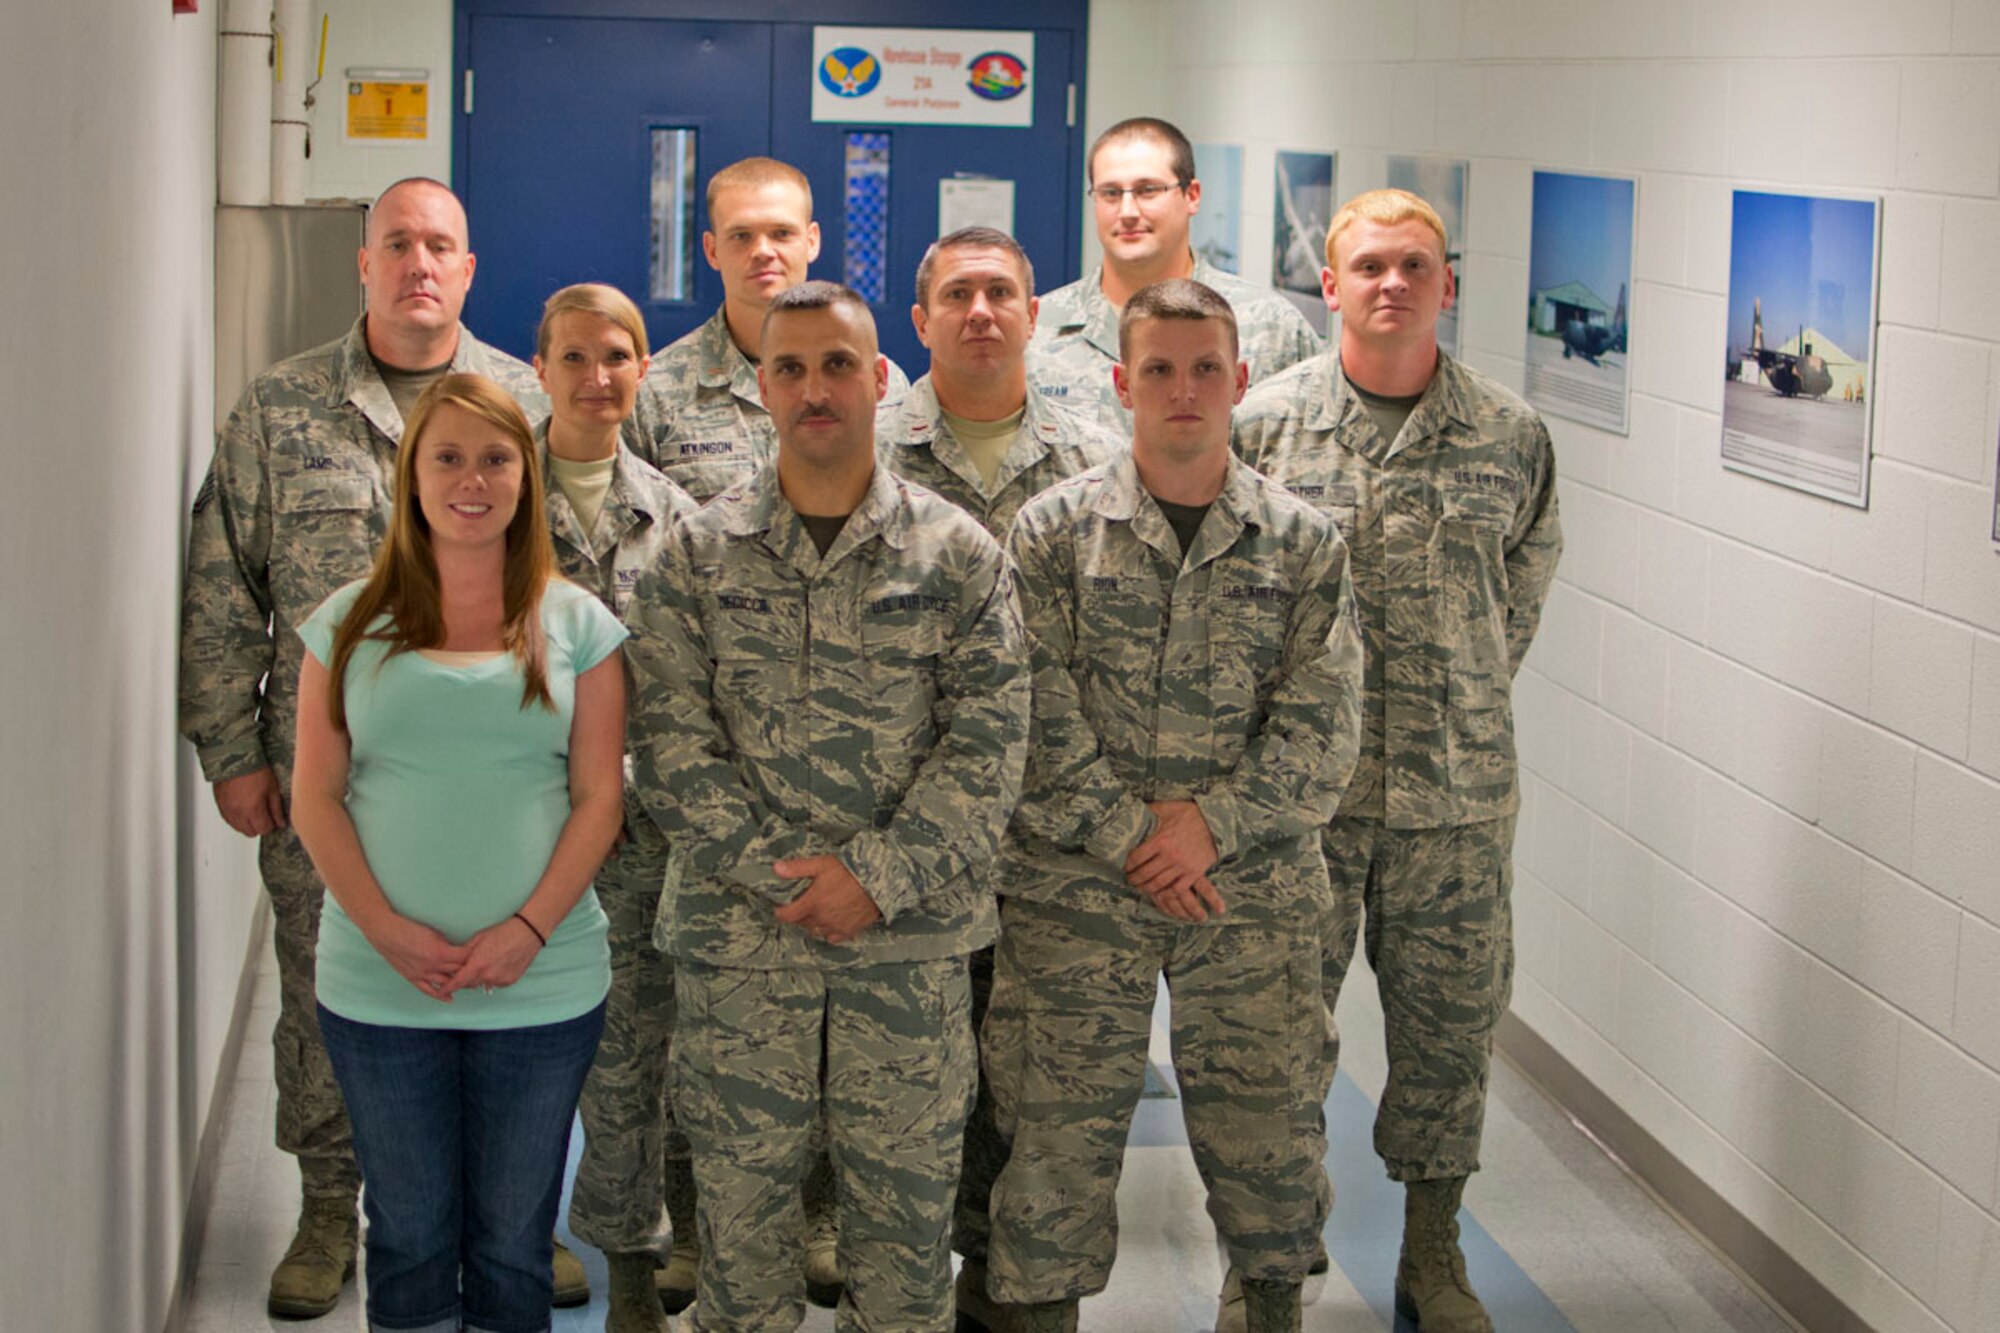 Graduates of the Logistics Readiness Squadron's Leadership Skills Academy received their completion certificates Saturday of Sept. UTA. The Leaderships Skills Academy is part of LRS's two tier training program geared toward developing the squadron's future leaders. (back row) Master Sgt. Jon Lamp, 2nd Lt. Clayton Atkinson, Staff Sgt. Andrew Fream, (middle row) Staff Sgt. Laura Shaffer, 2nd Lt. Kevin Hurlbrink, Master Sgt. Justin Walther, (front row) Staff Sgt. Chastity Eggleton, Master Sgt. James DeCicco, and Staff Sgt. Chris¬topher Rion. (Air National Guard photo by Tech.  Sgt. Michael Dickson/released)